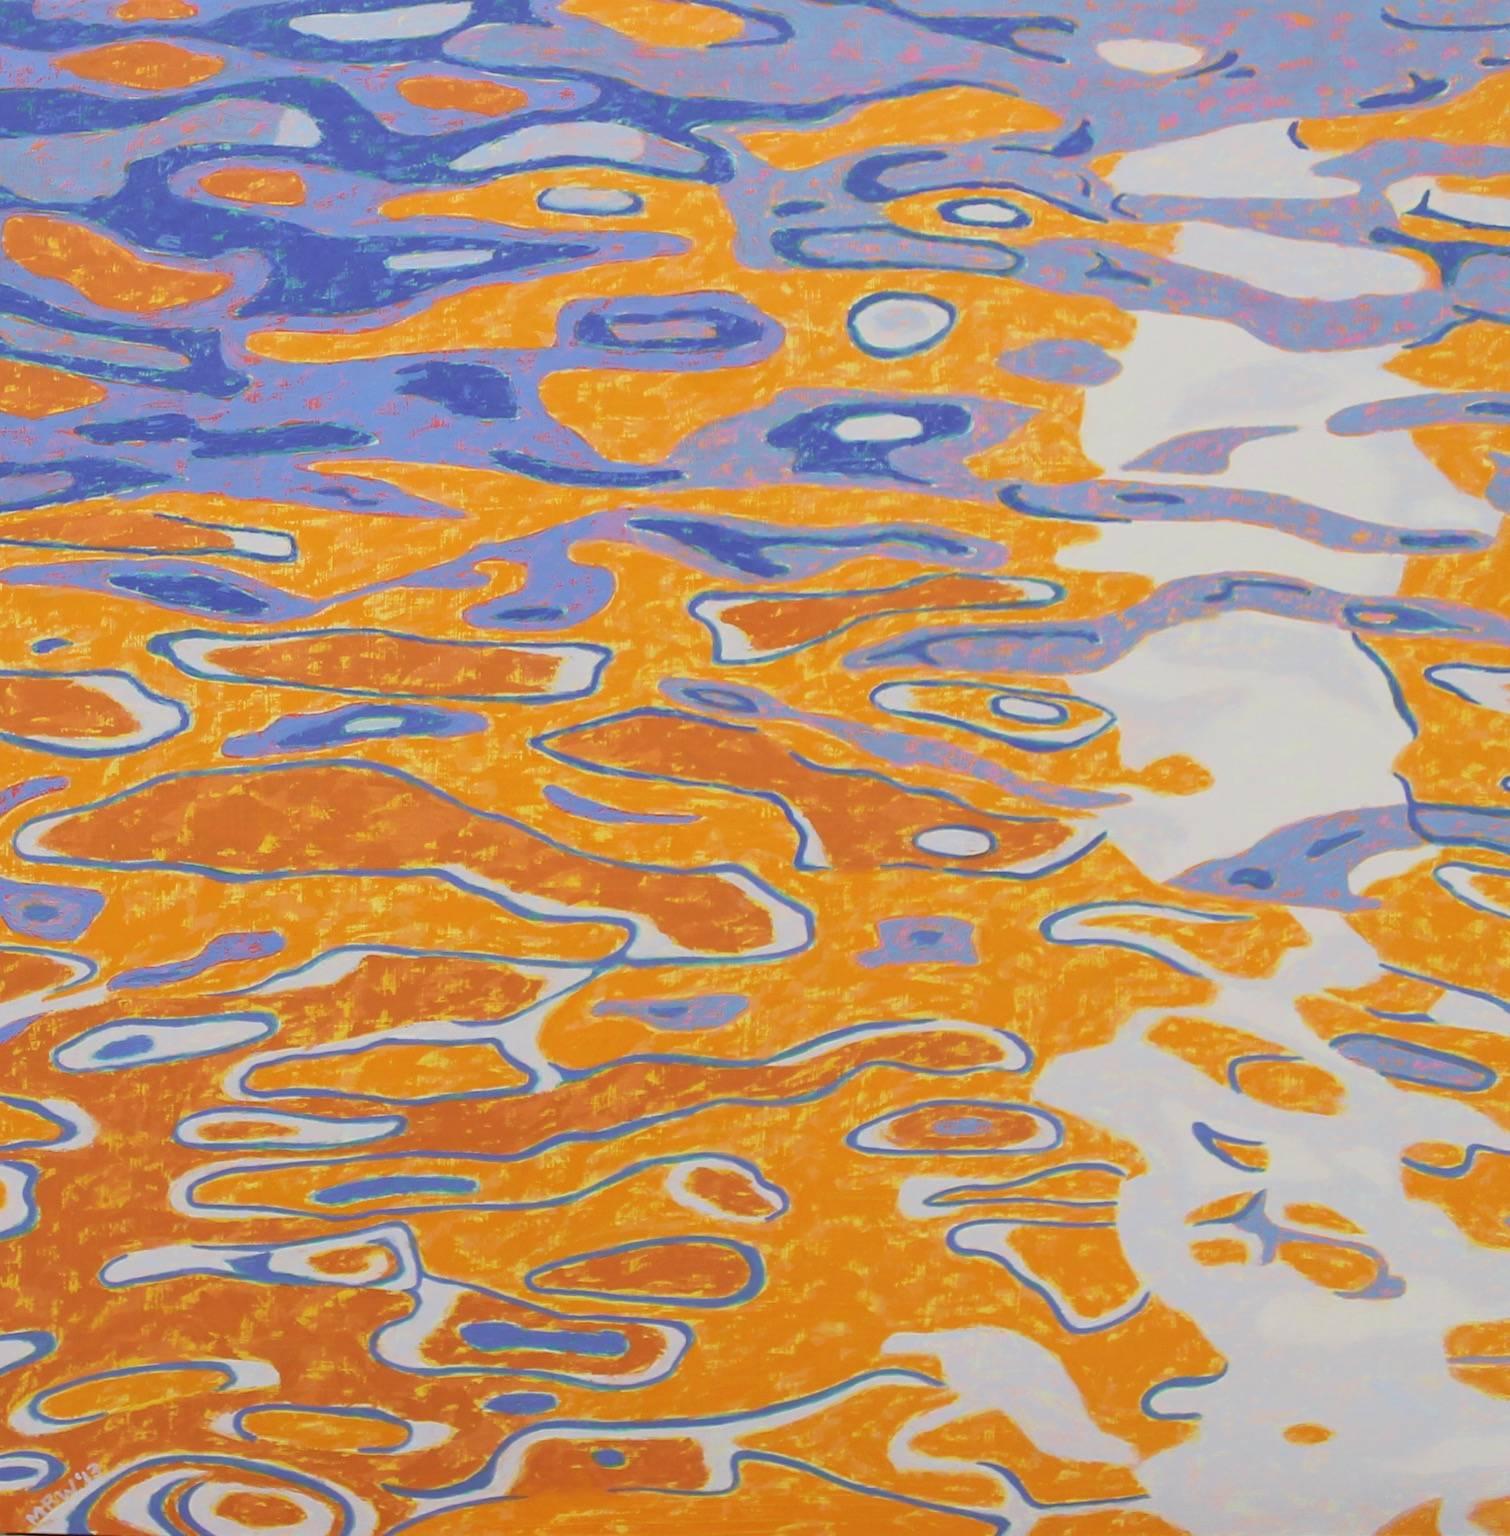 "Fall Reflections", oil painting, abstract, water, blues, oranges, yellows - Painting by Marcia Wise